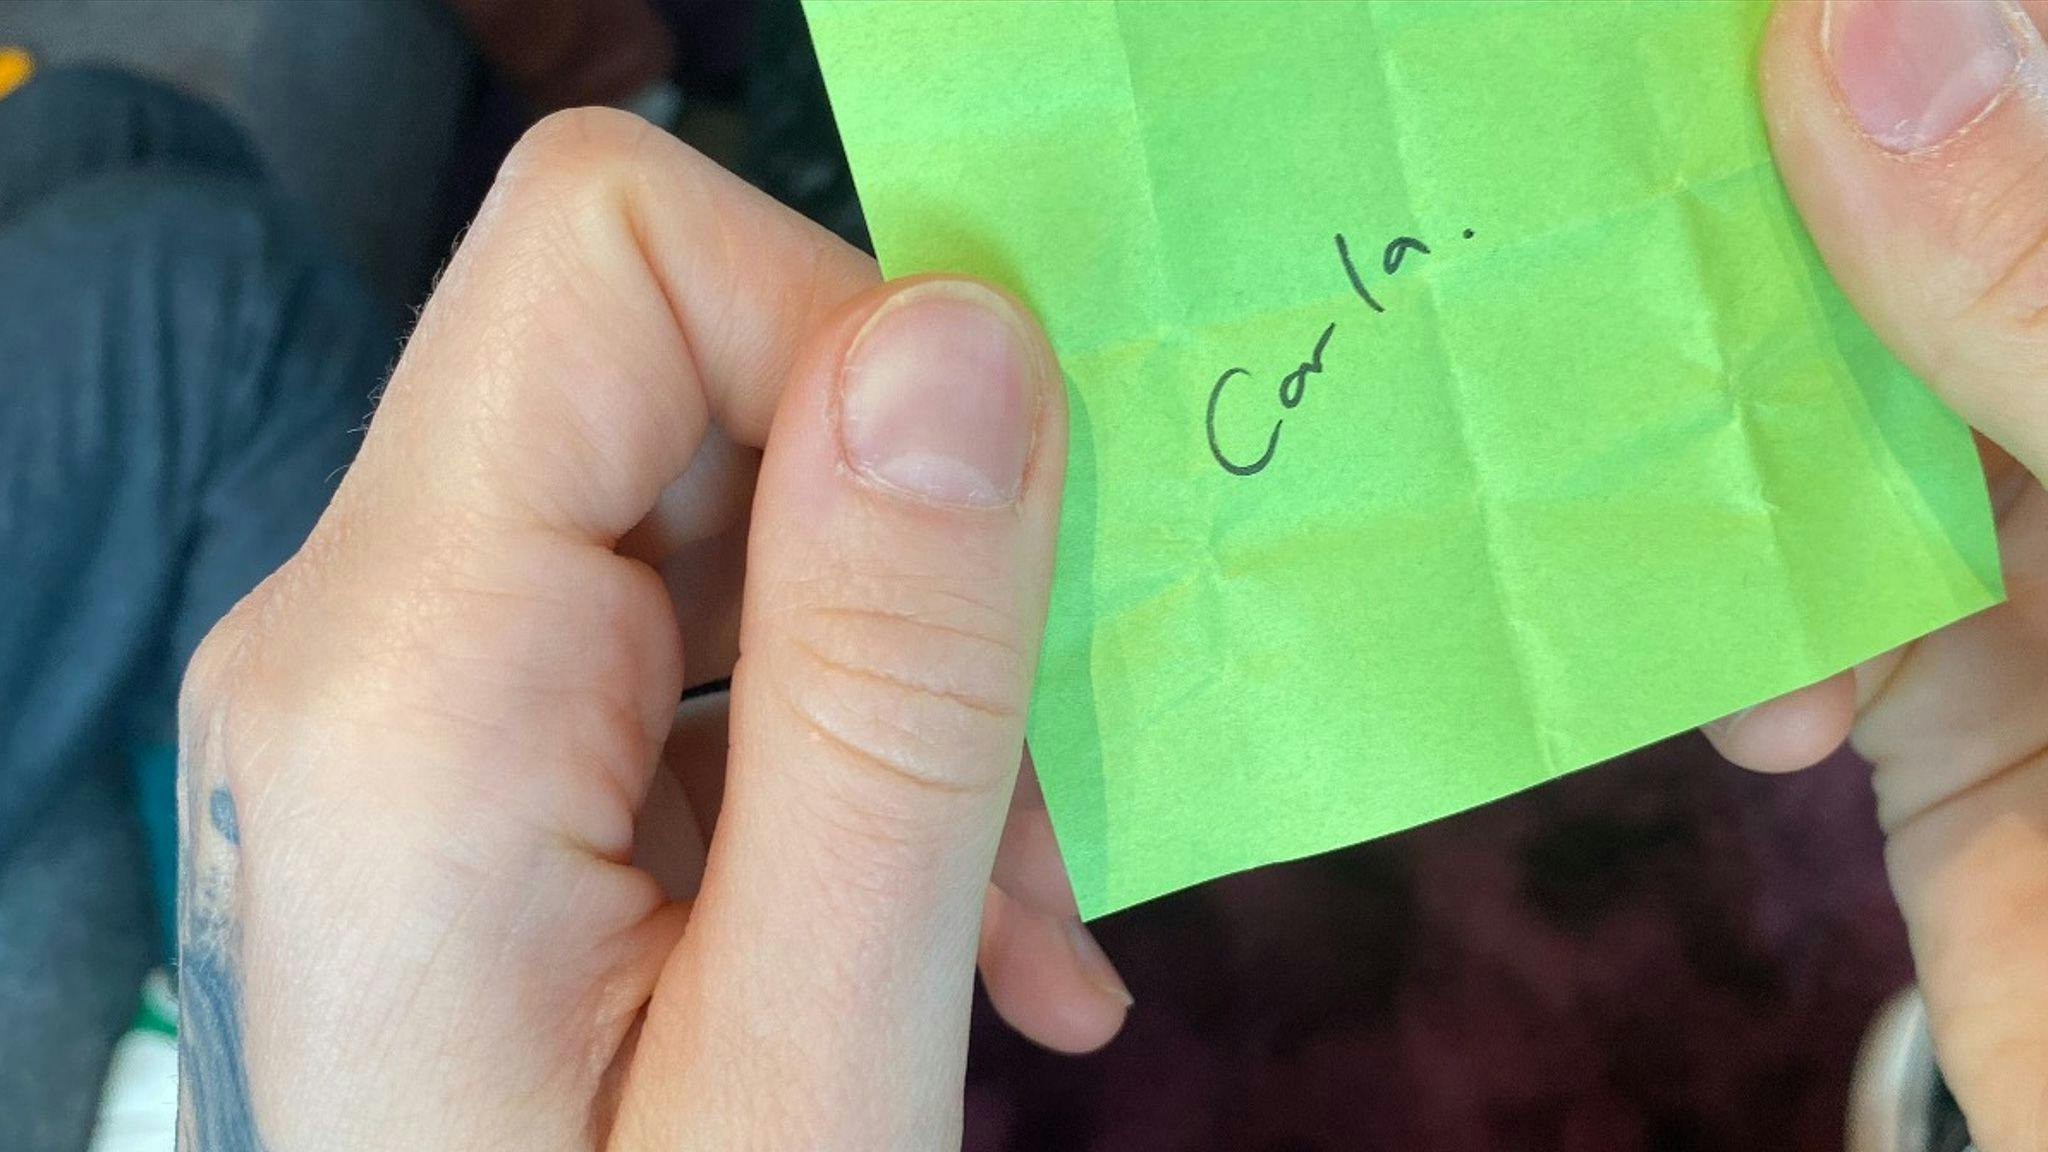 A hand holding a green post-it with the name "Carla" written on it.